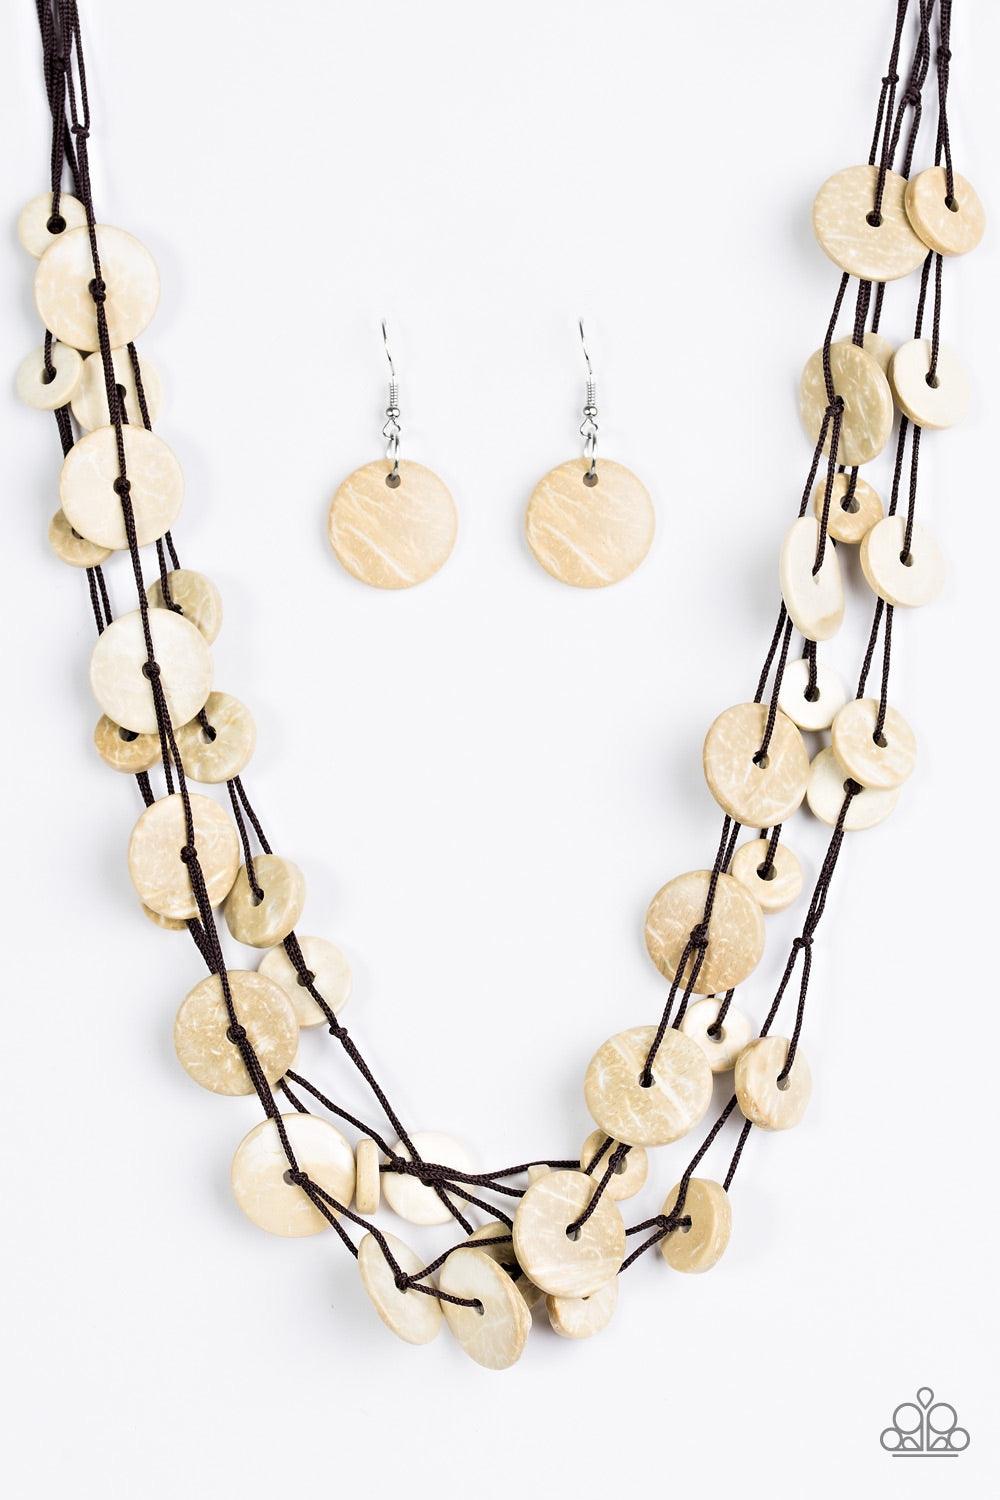 Paparazzi Accessories Bermuda Beach House - White Tinted in a neutral white finish, distressed wooden discs trickle along strands of knotted brown cording, creating colorful layers below the collar for a seasonal vibe. Features a button-loop closure. Jewe